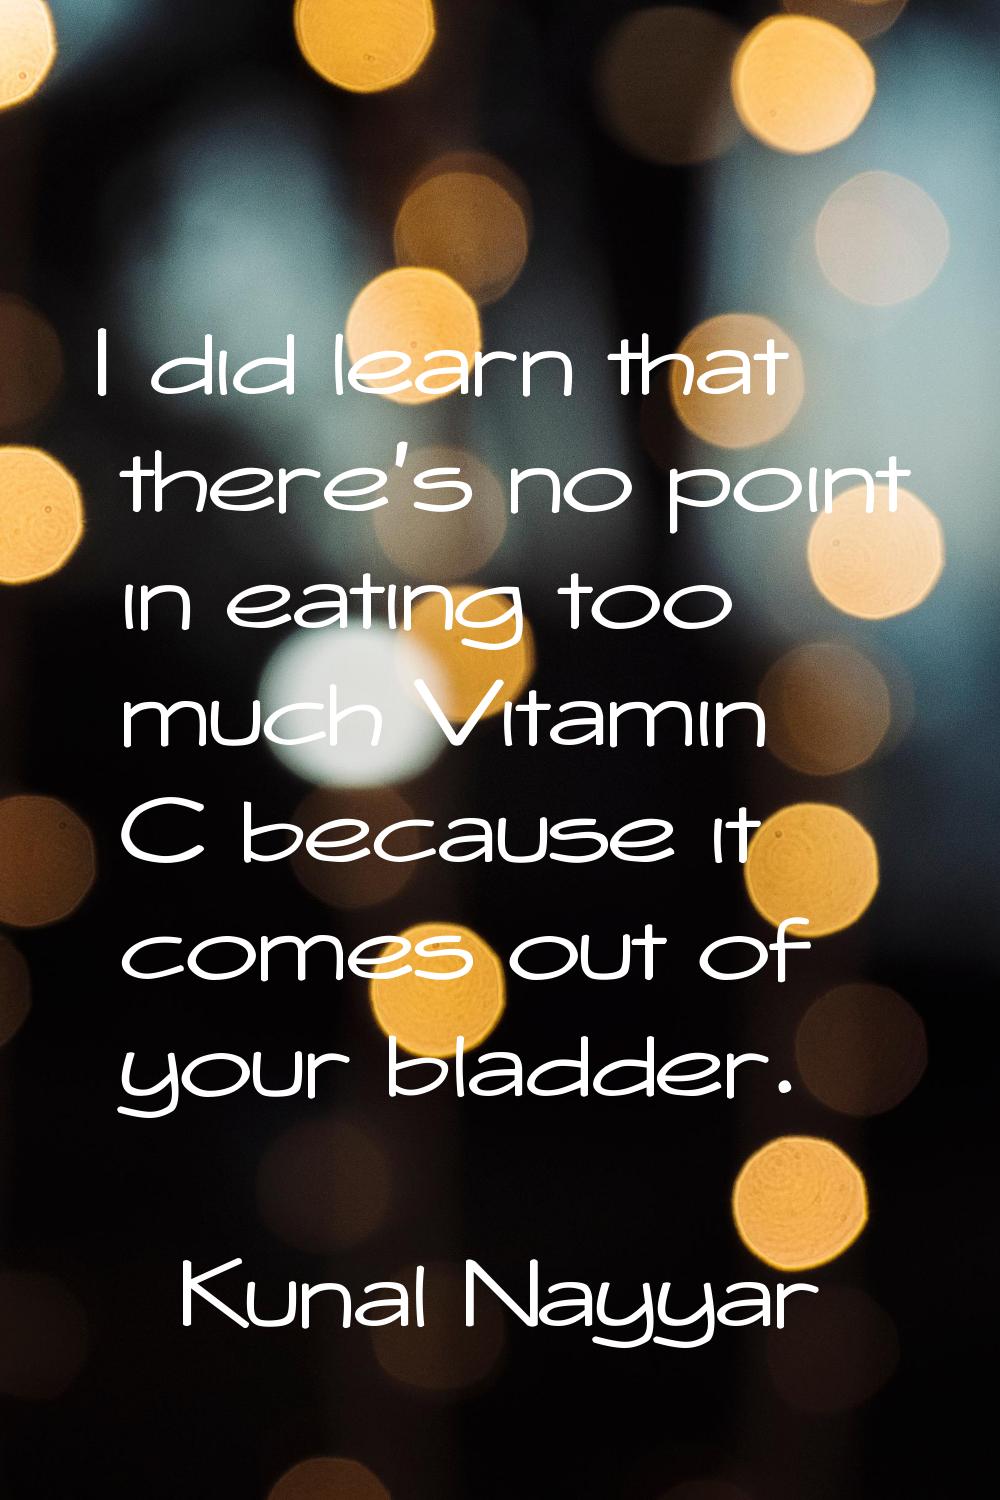 I did learn that there's no point in eating too much Vitamin C because it comes out of your bladder